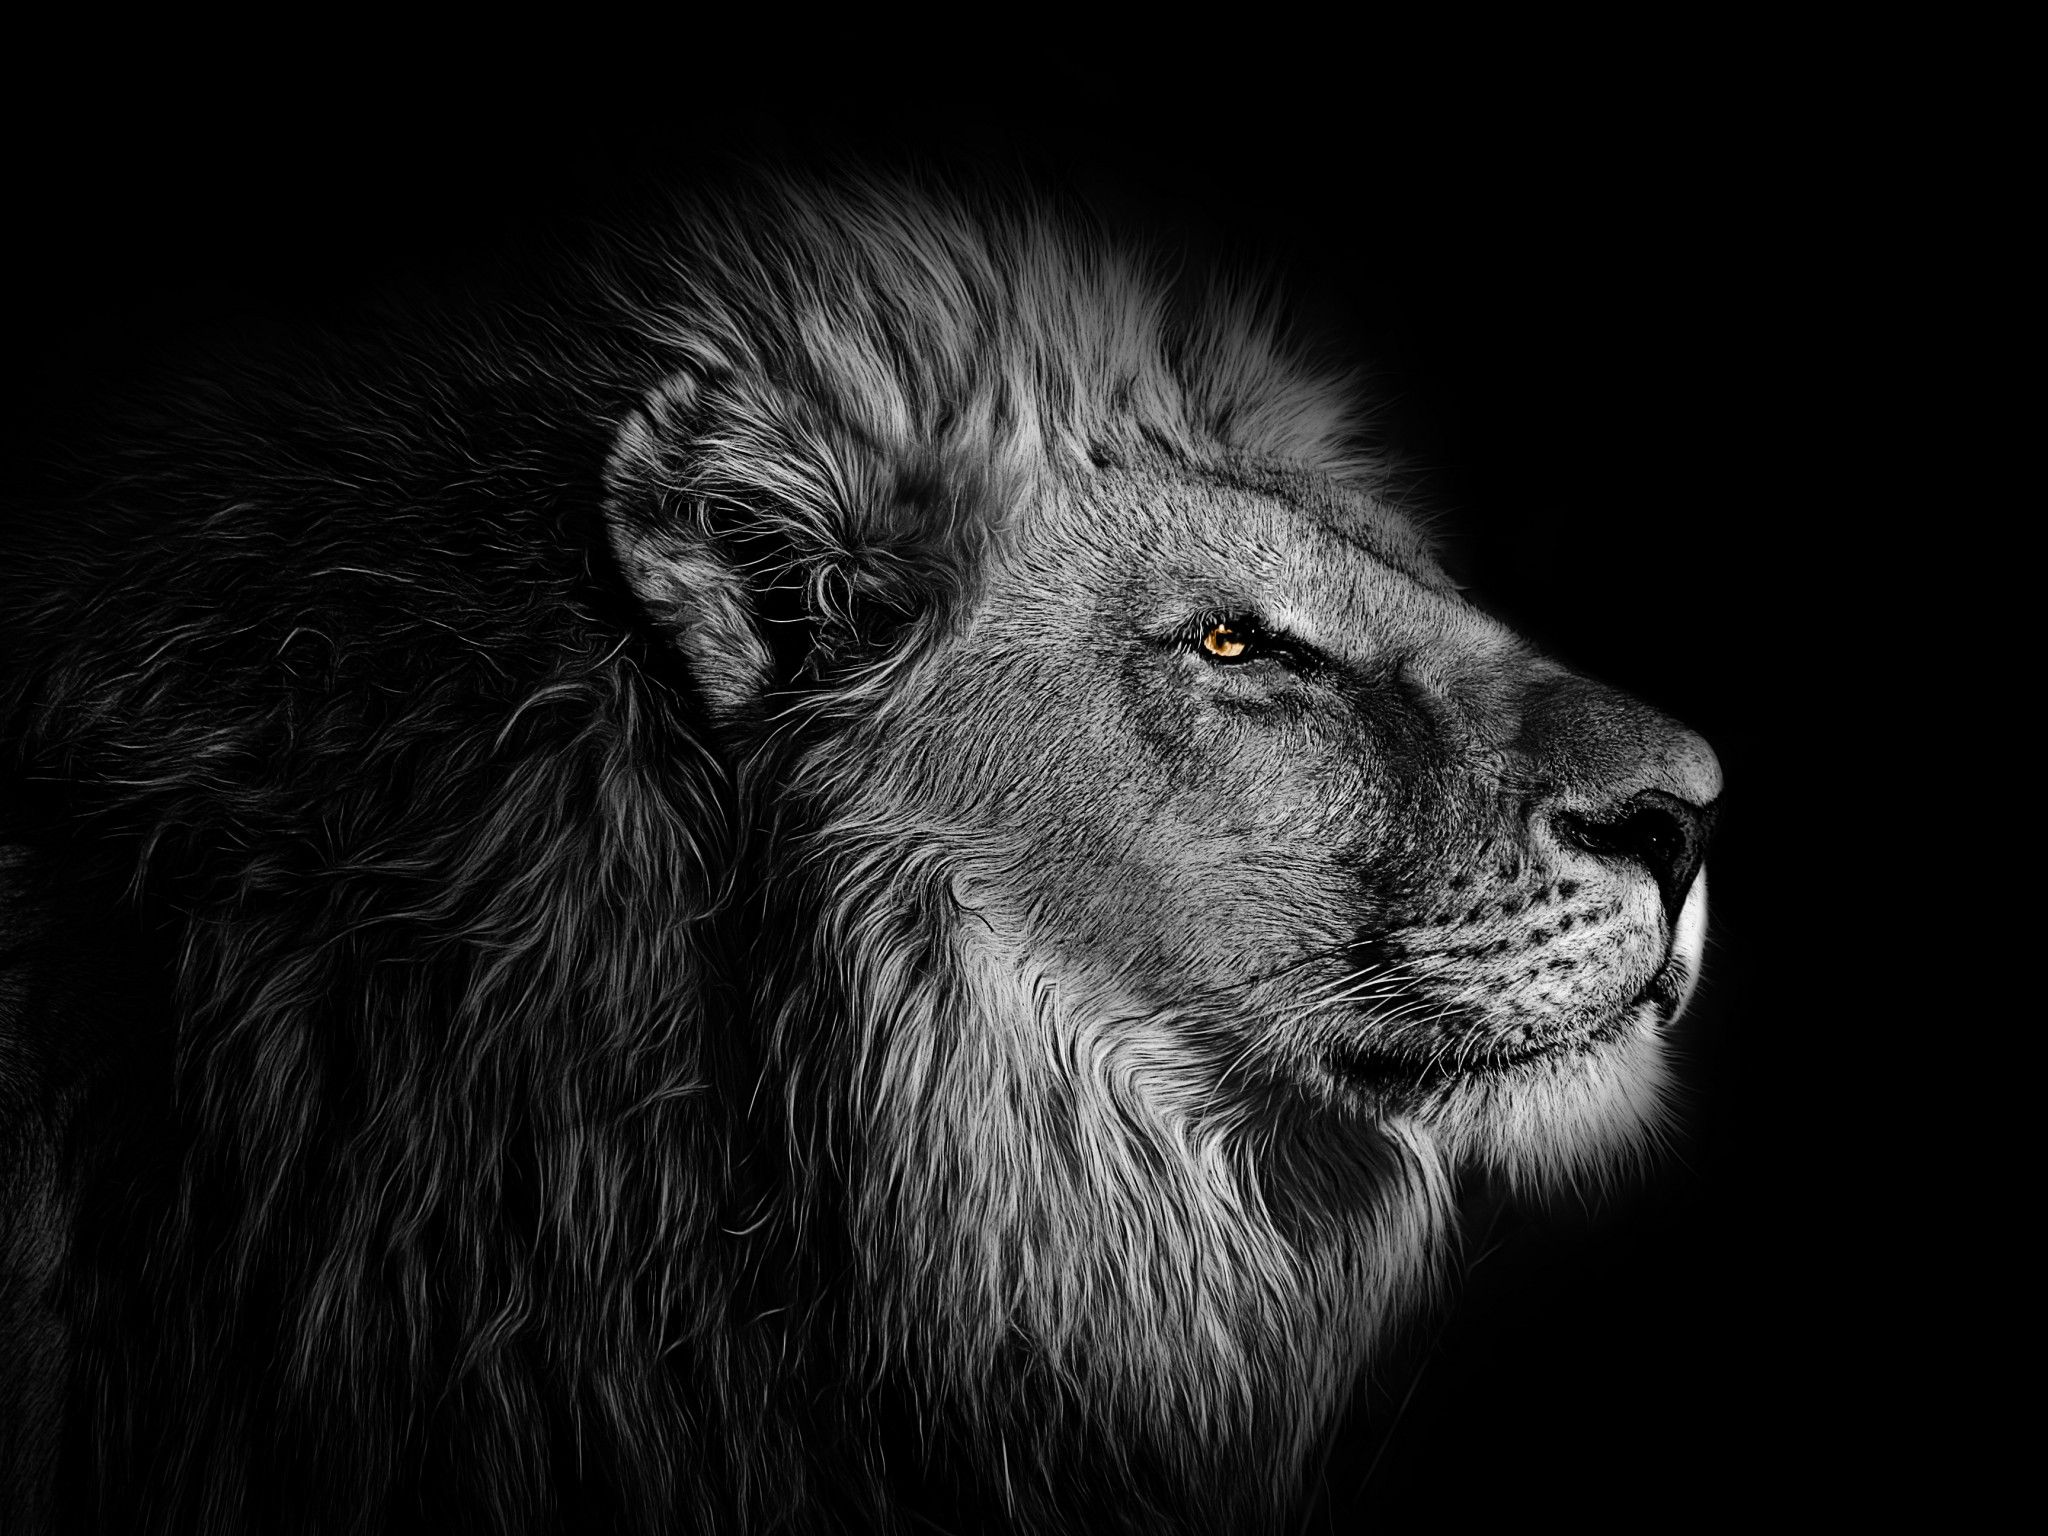 Lion Amoled 4k Wallpapers - Wallpaper Cave